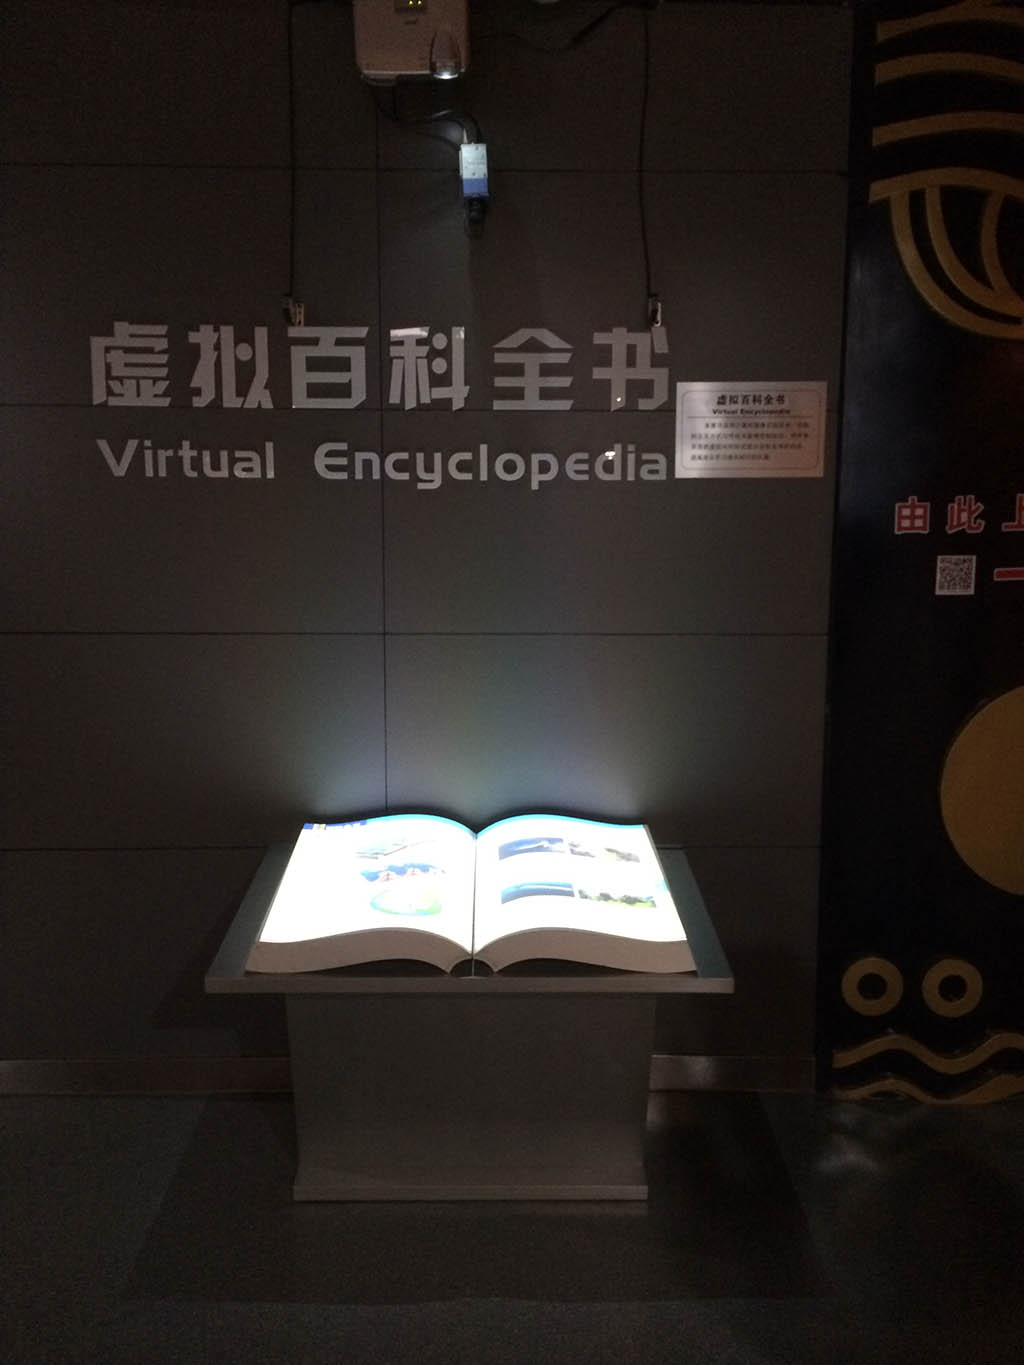 Zhangjiagang science and Technology Museum